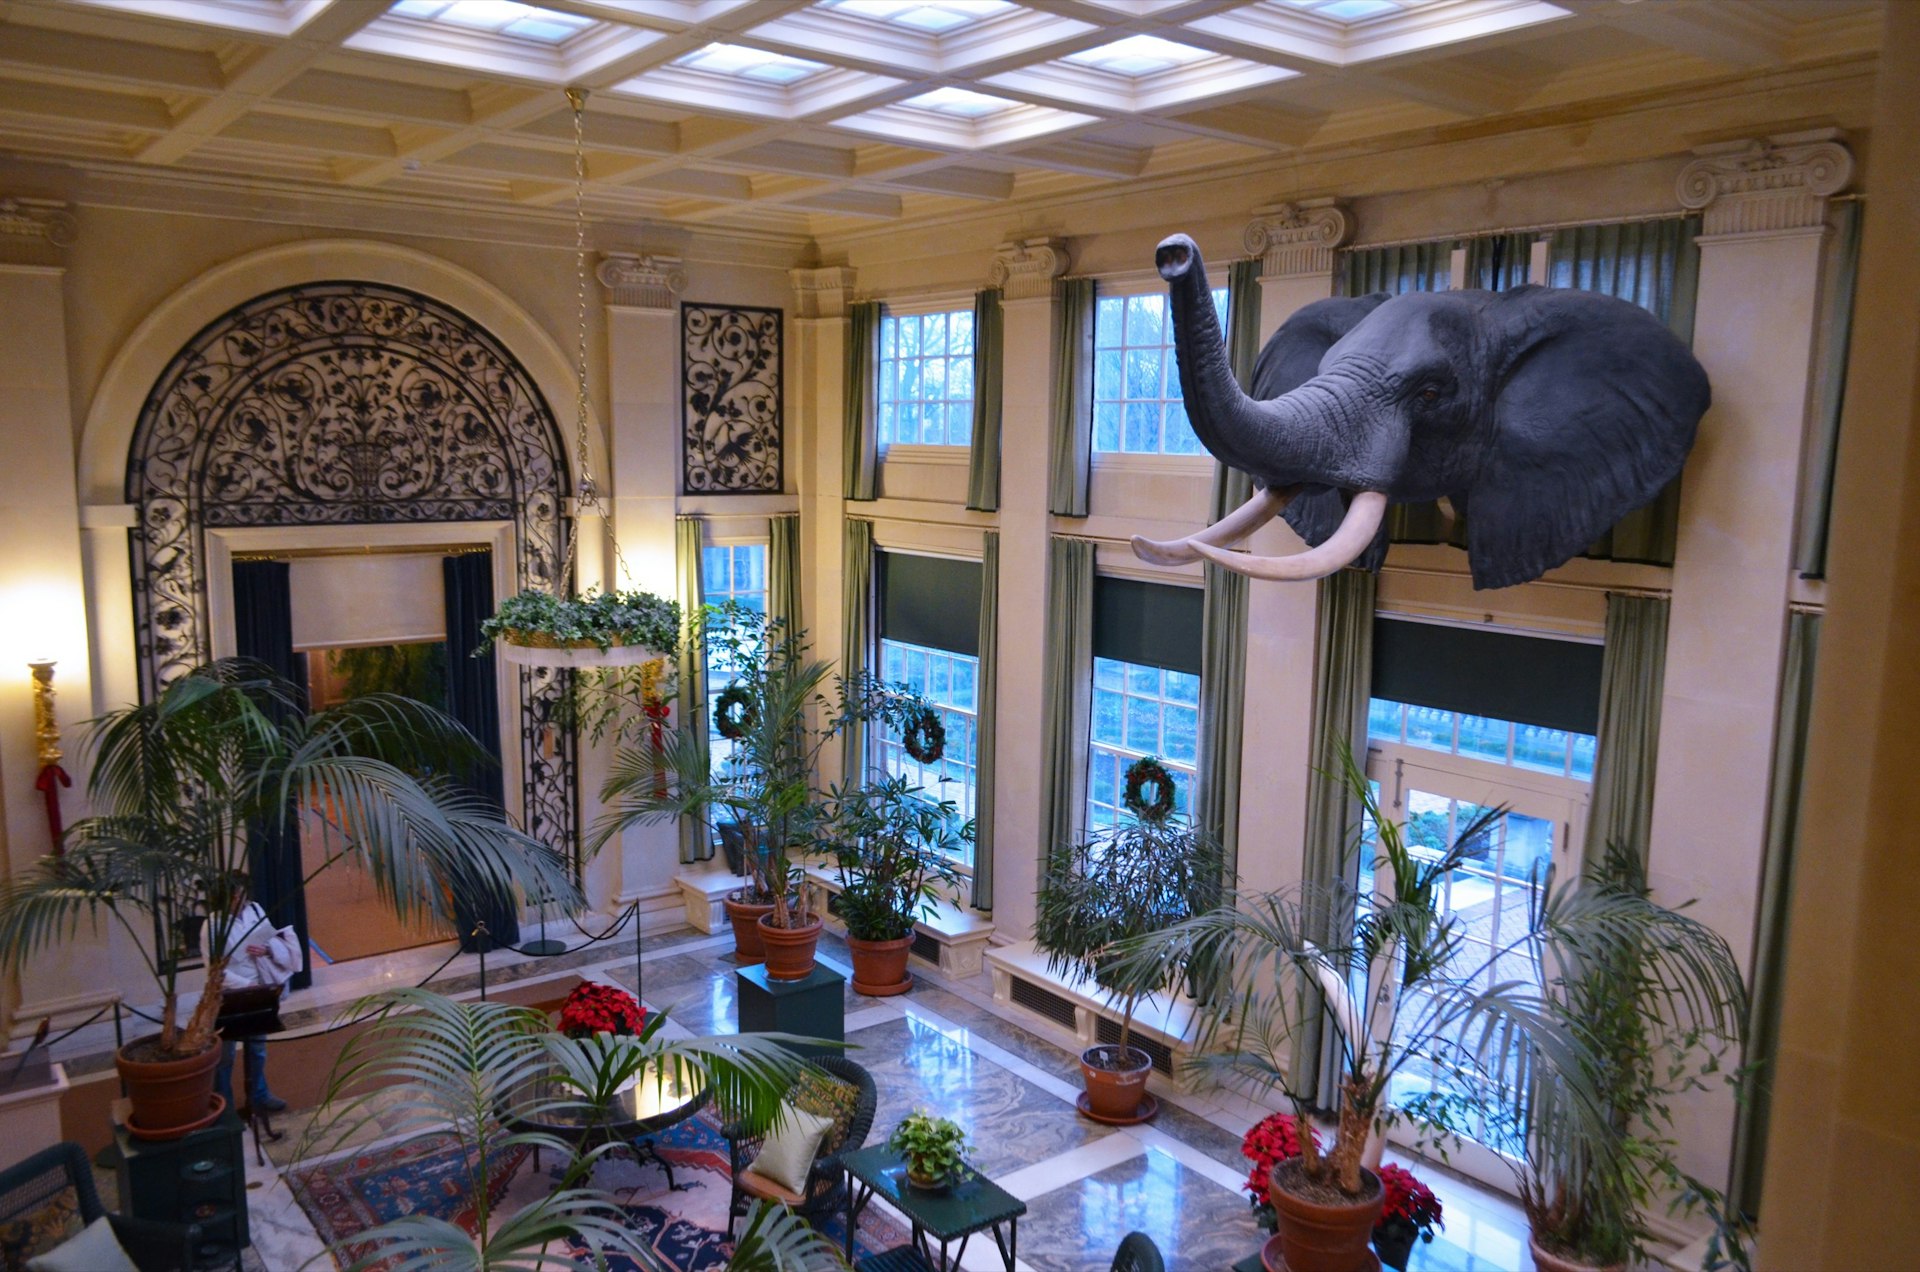 A not-real-looking elephant's head is mounted in an airy parlor in an obviously large house in Rochester, New York